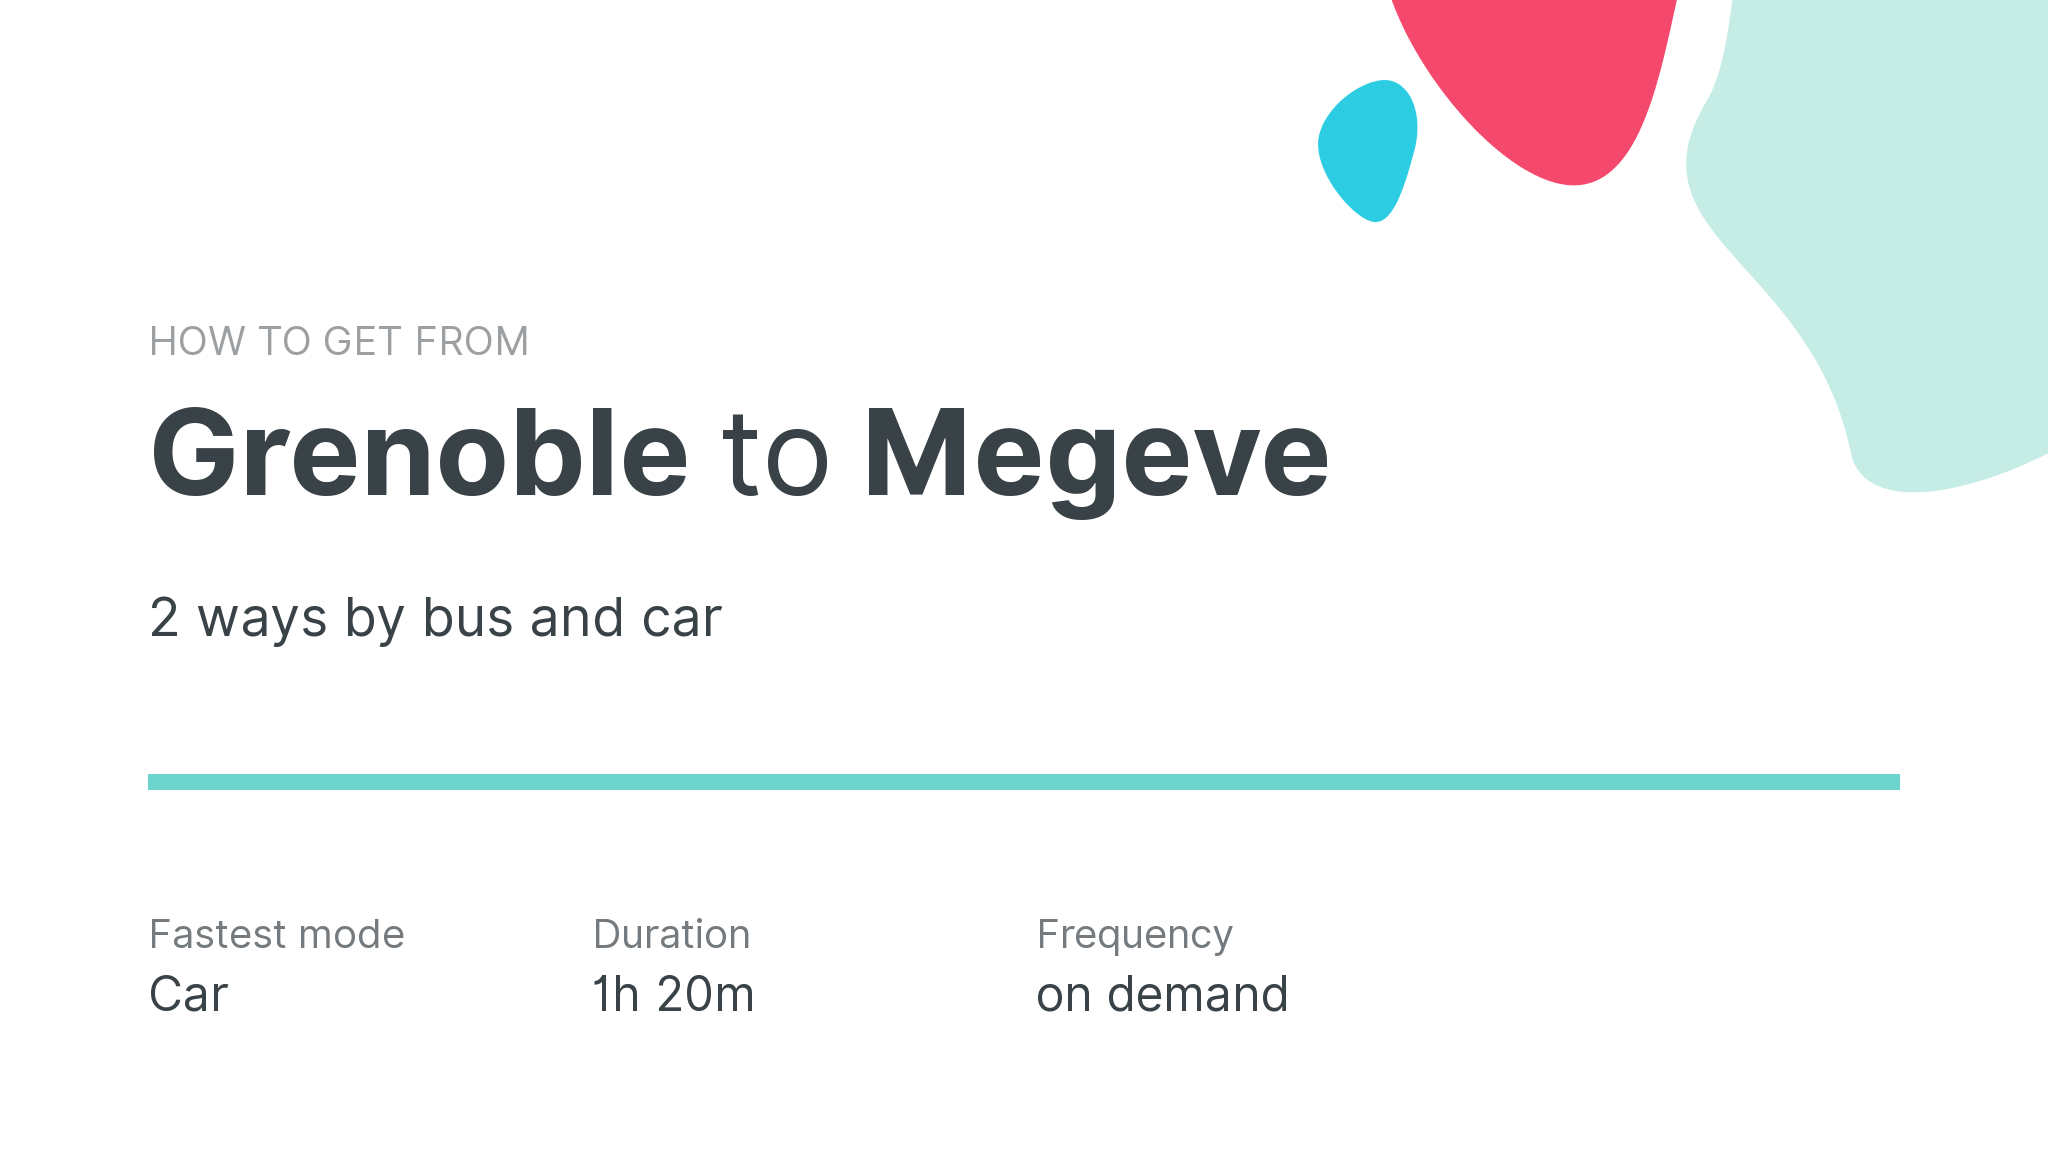 How do I get from Grenoble to Megeve